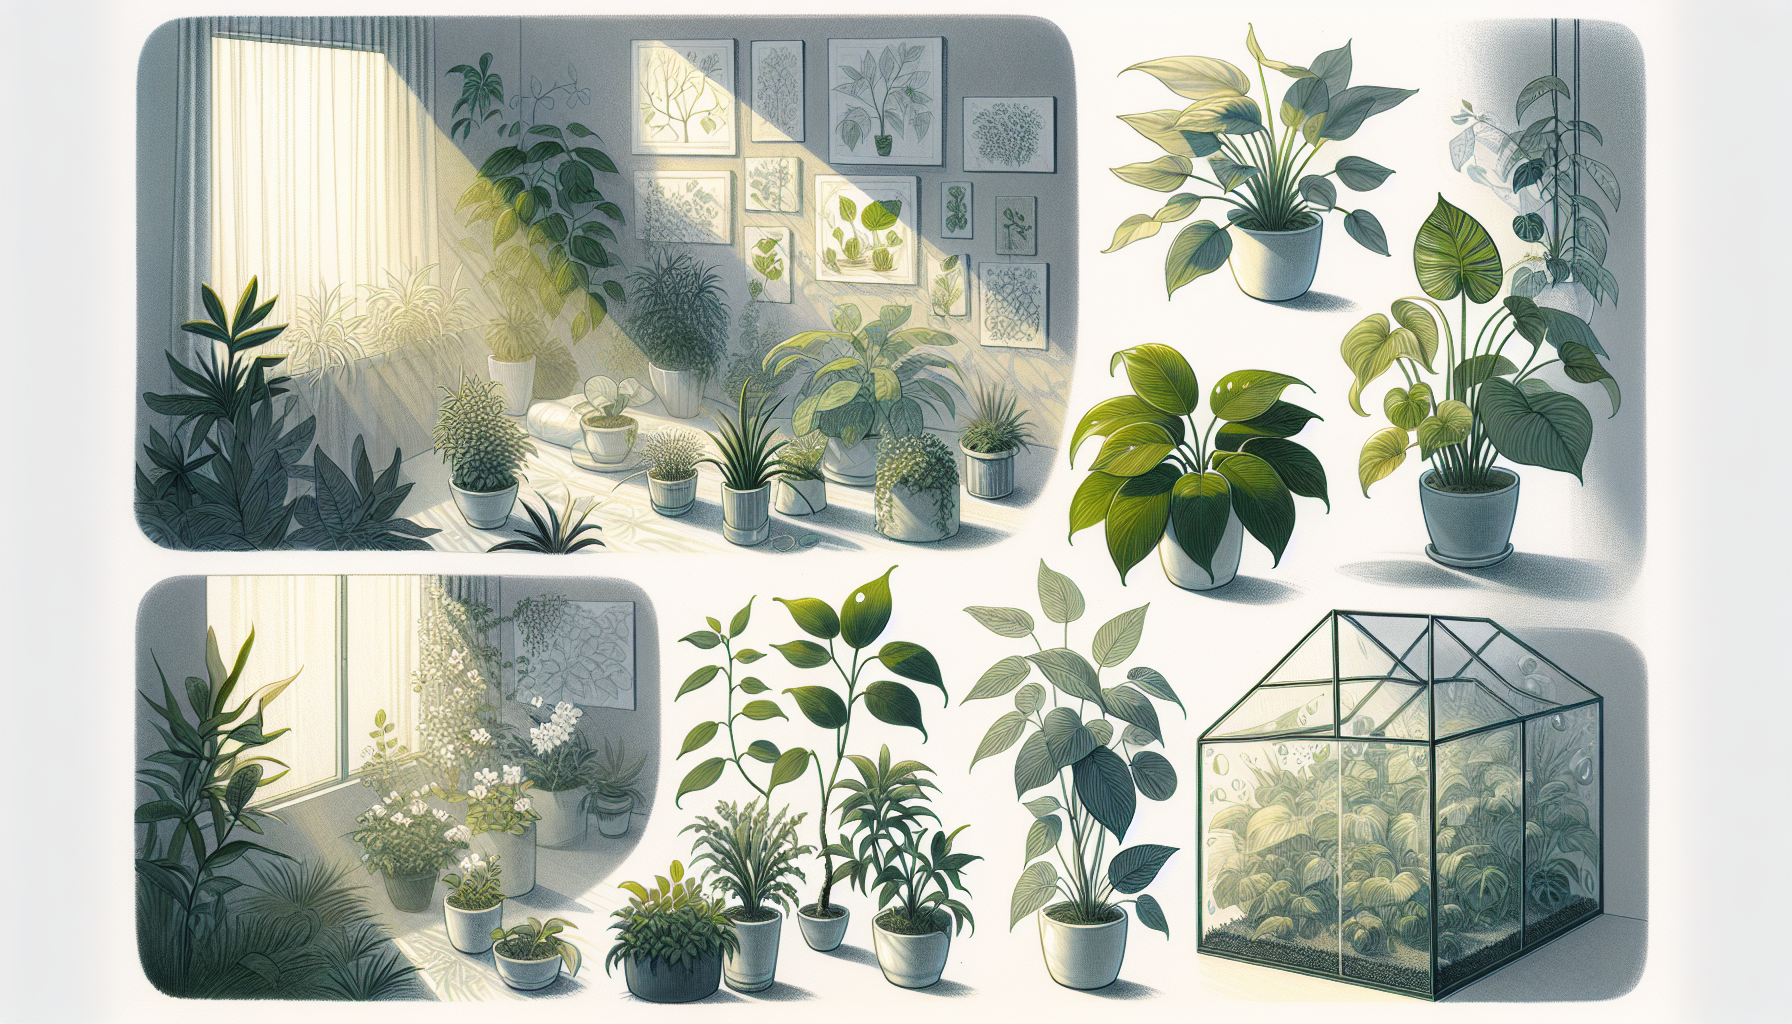 Illustration of indoor plants in various light and humidity conditions